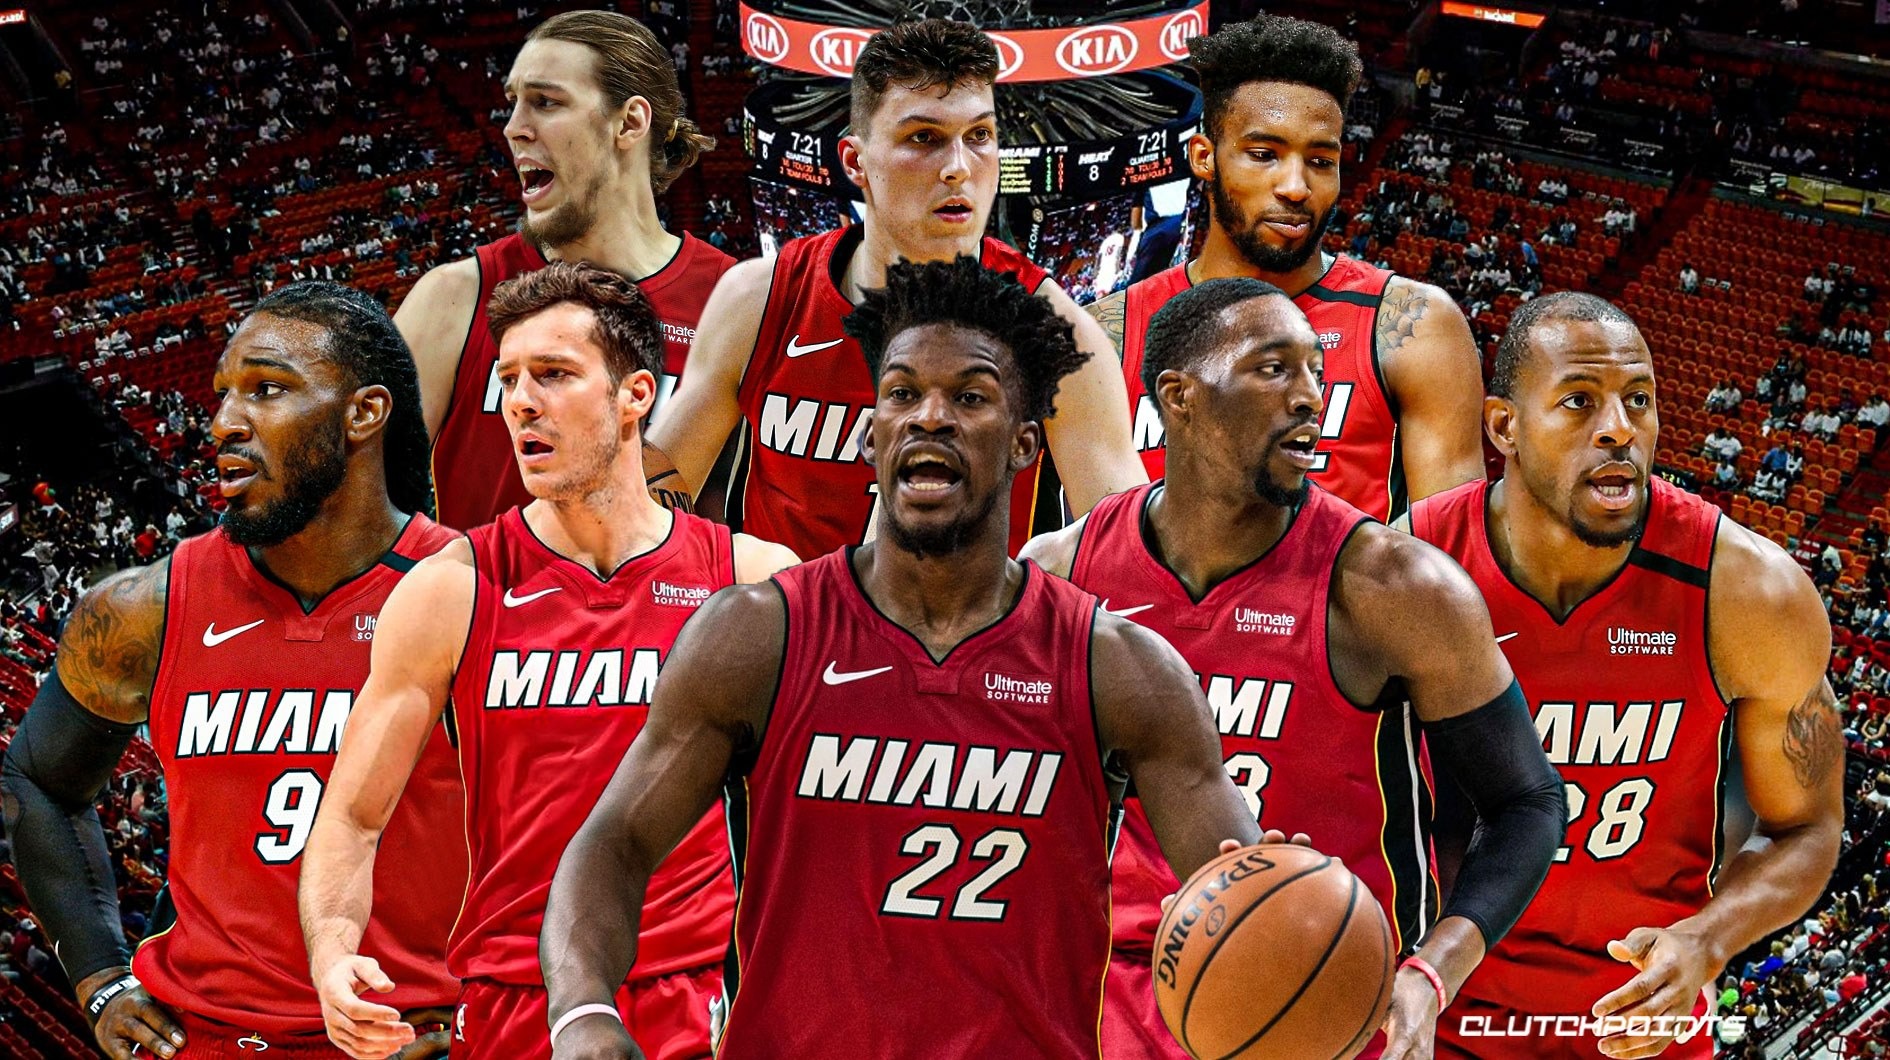 Who Owns the Miami Heat